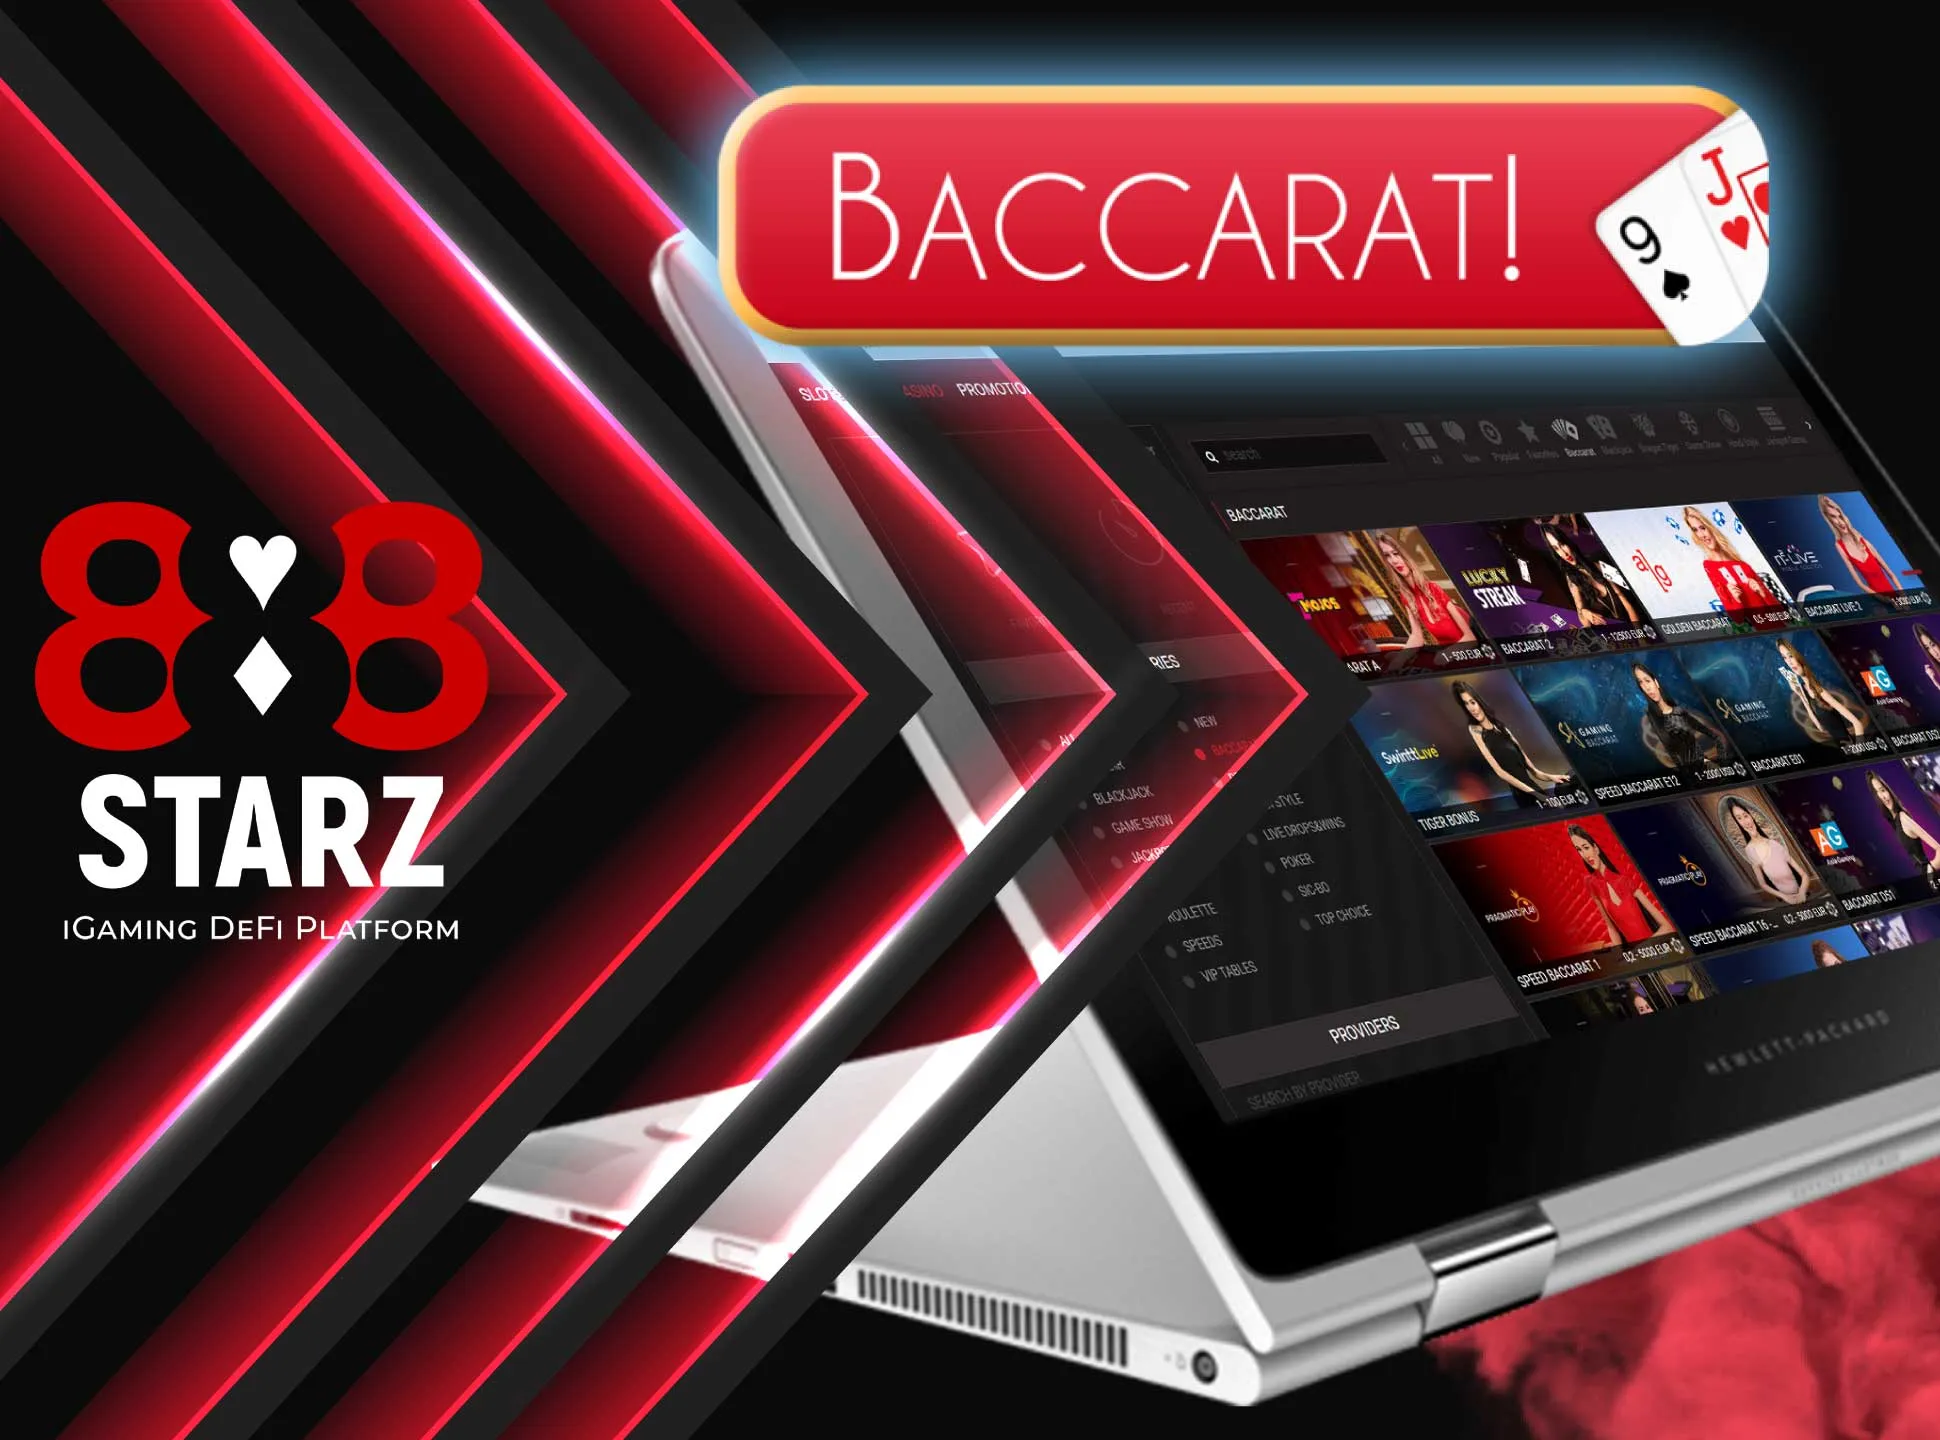 Traditional baccarat game is also available on 888starz.